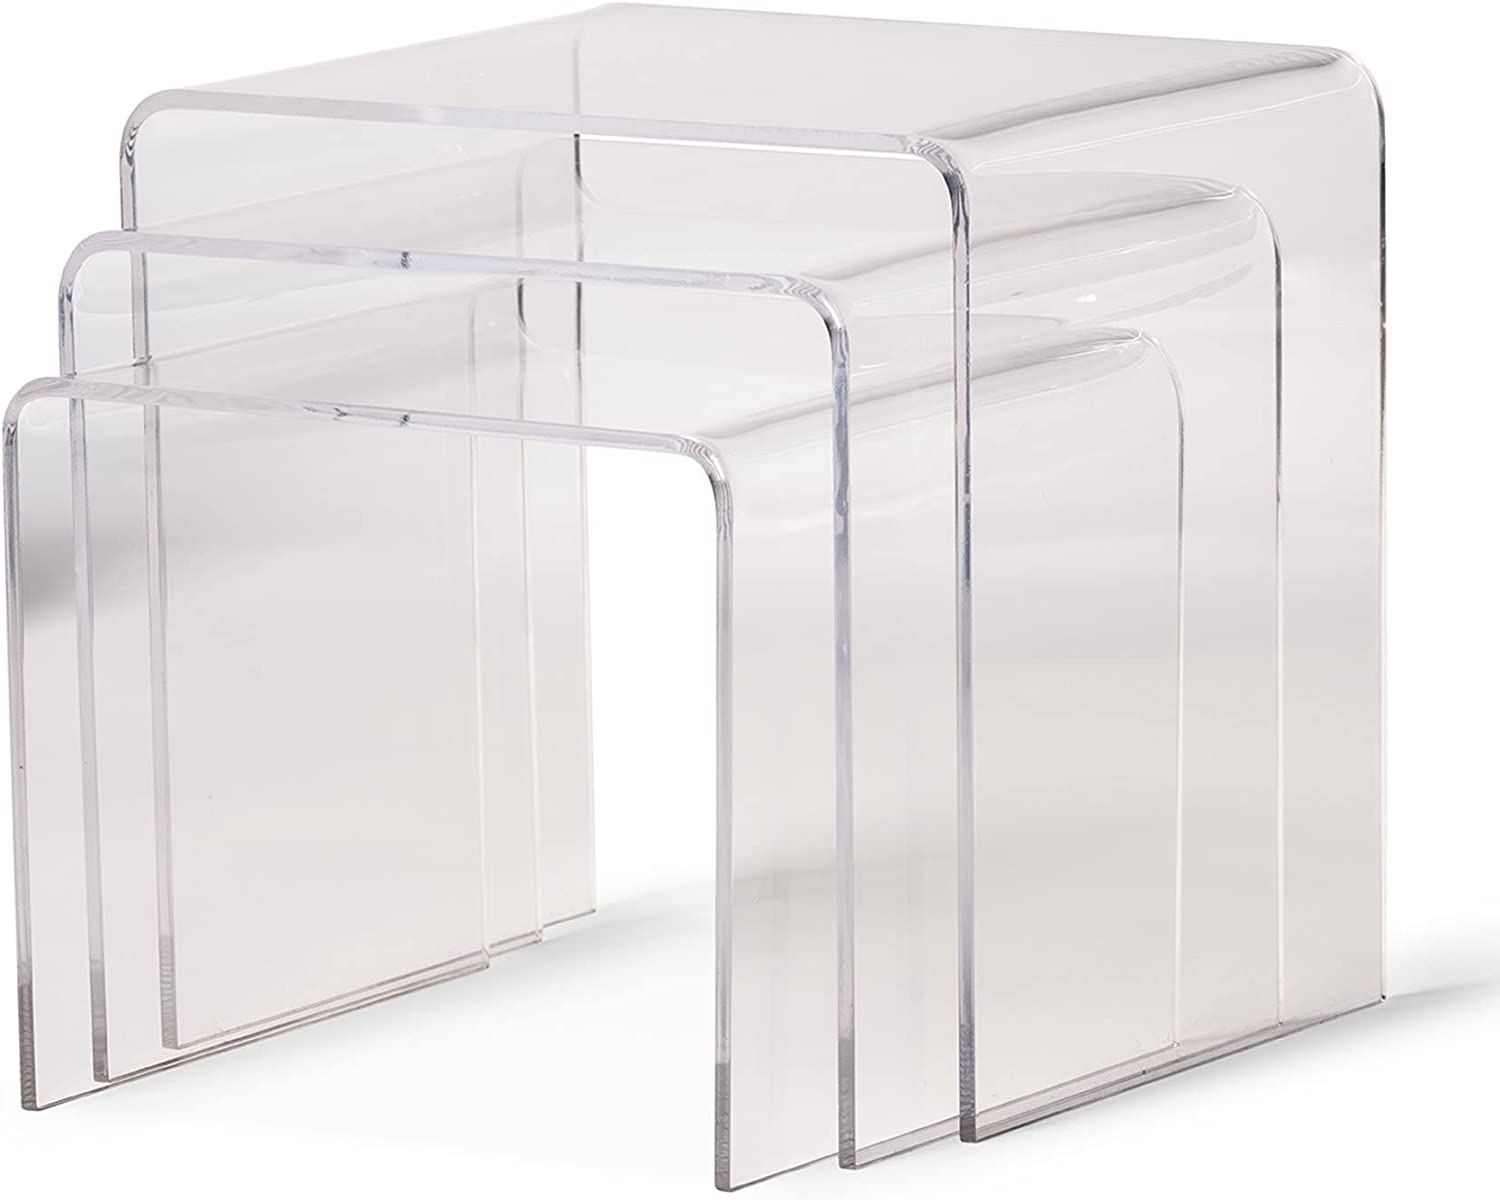 It Wasn’t Easy, But We Found 18 Nesting Tables That Save Space and Look Good While Doing It